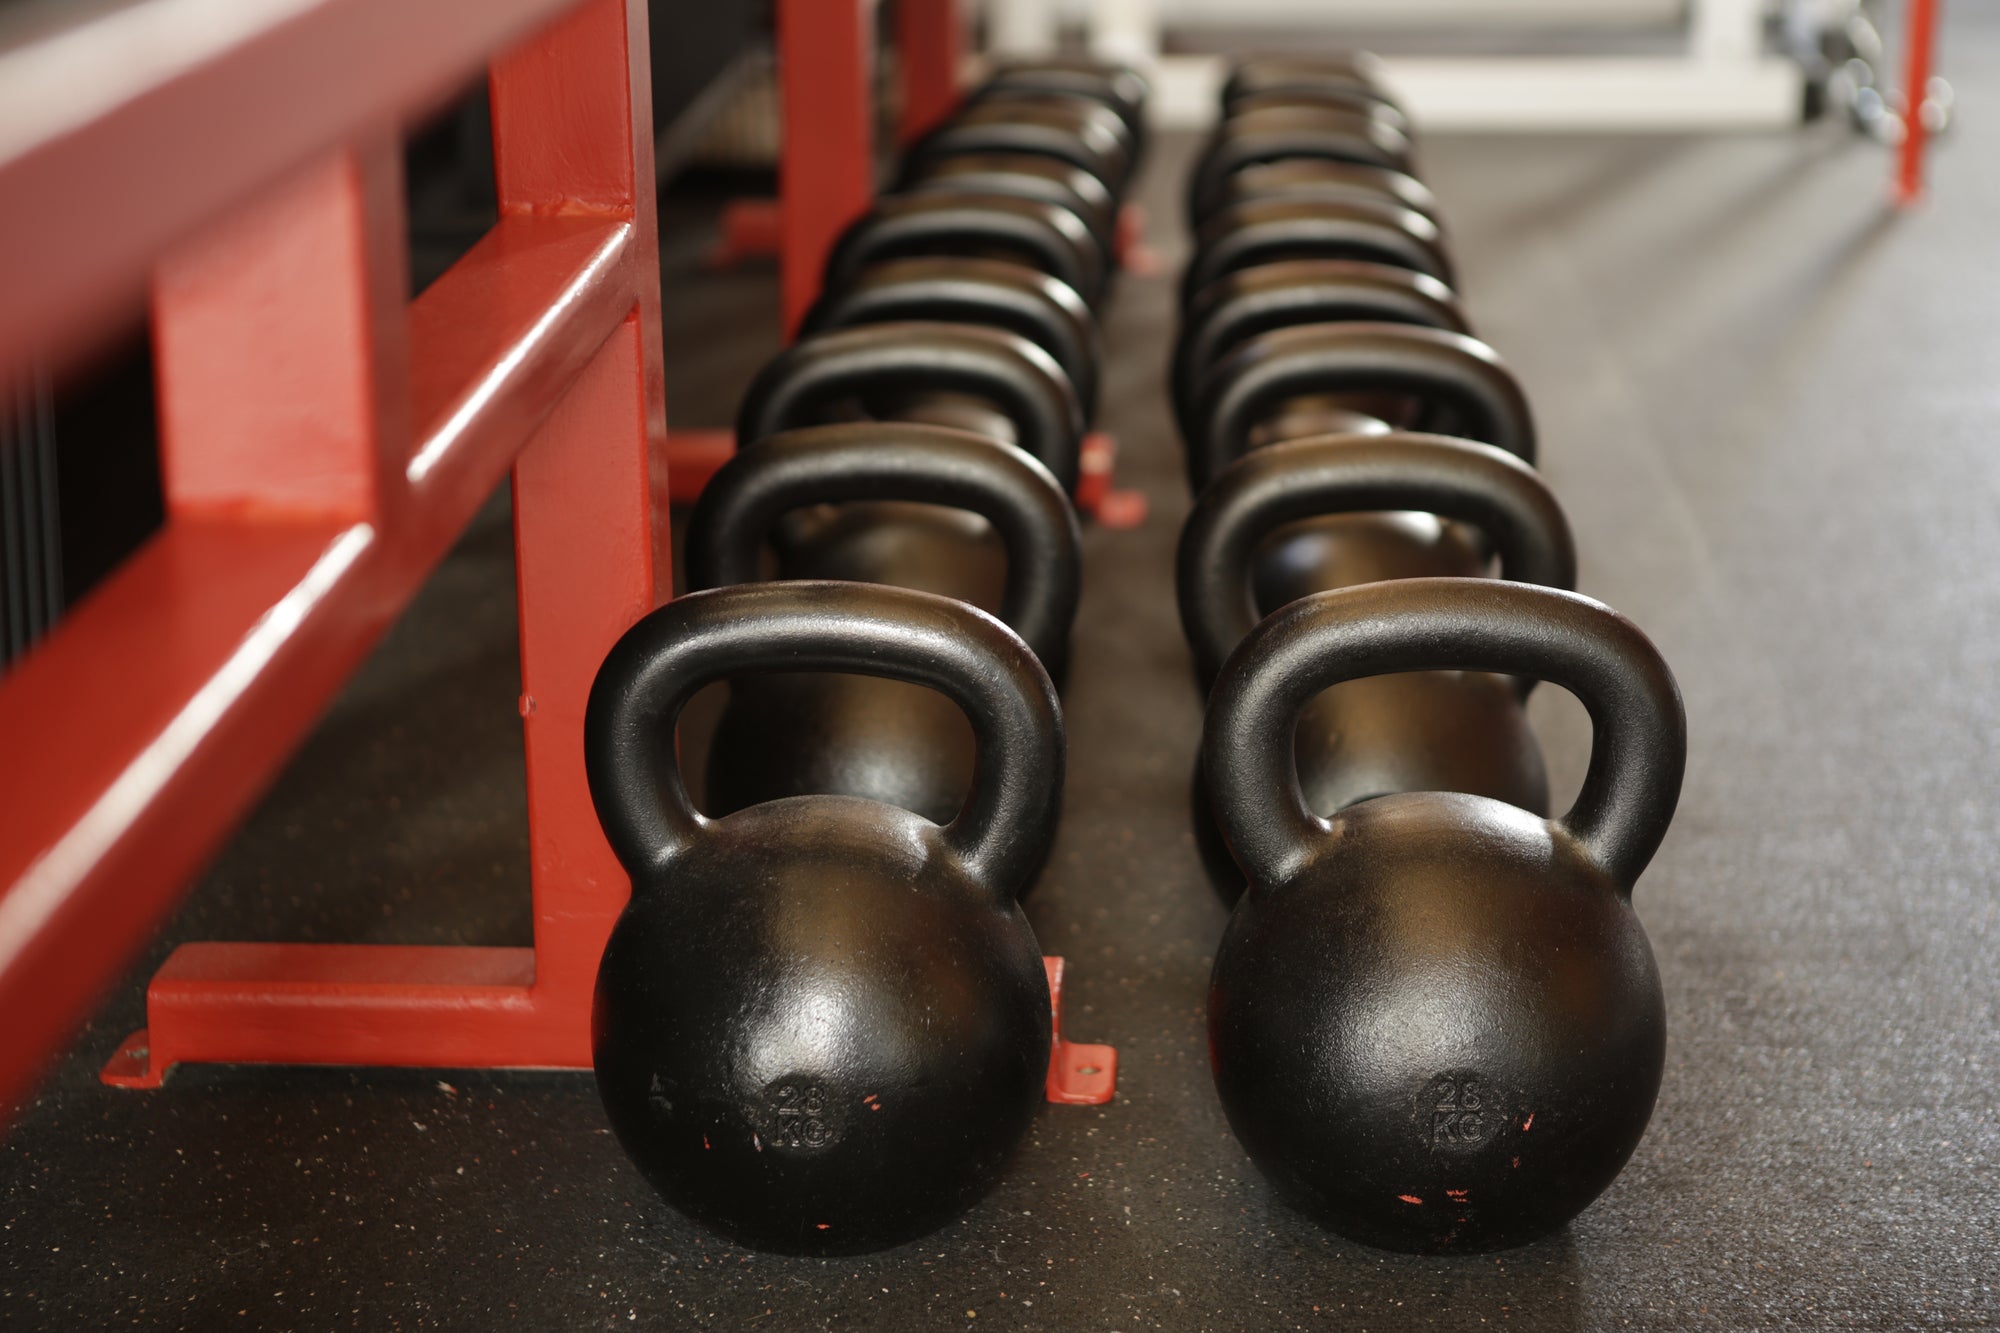 Working With Weights: 5 Top Tips